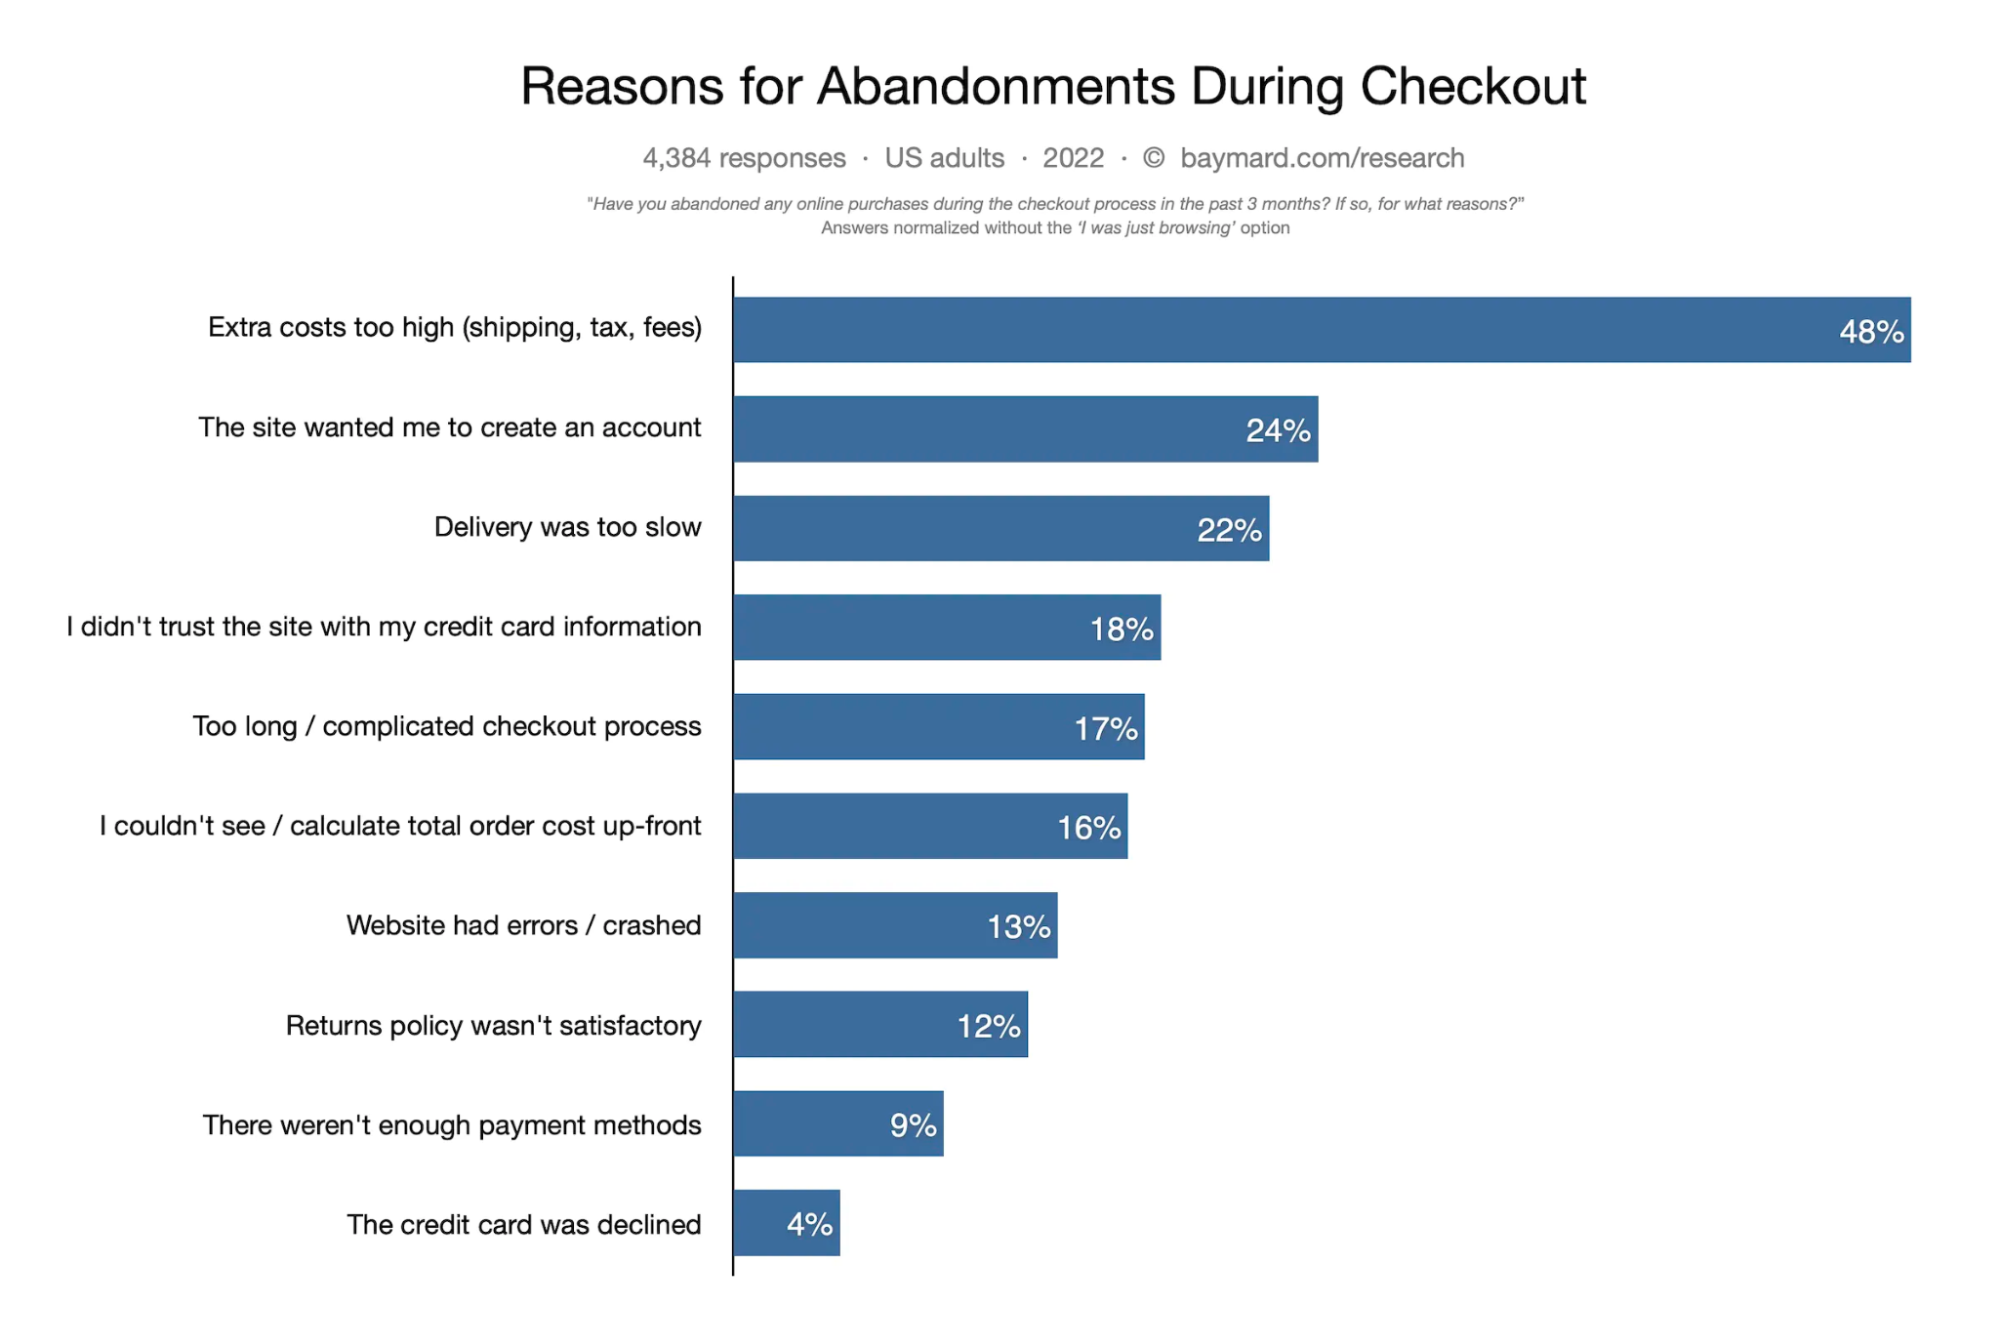 Reasons for Abandonment During Checkout